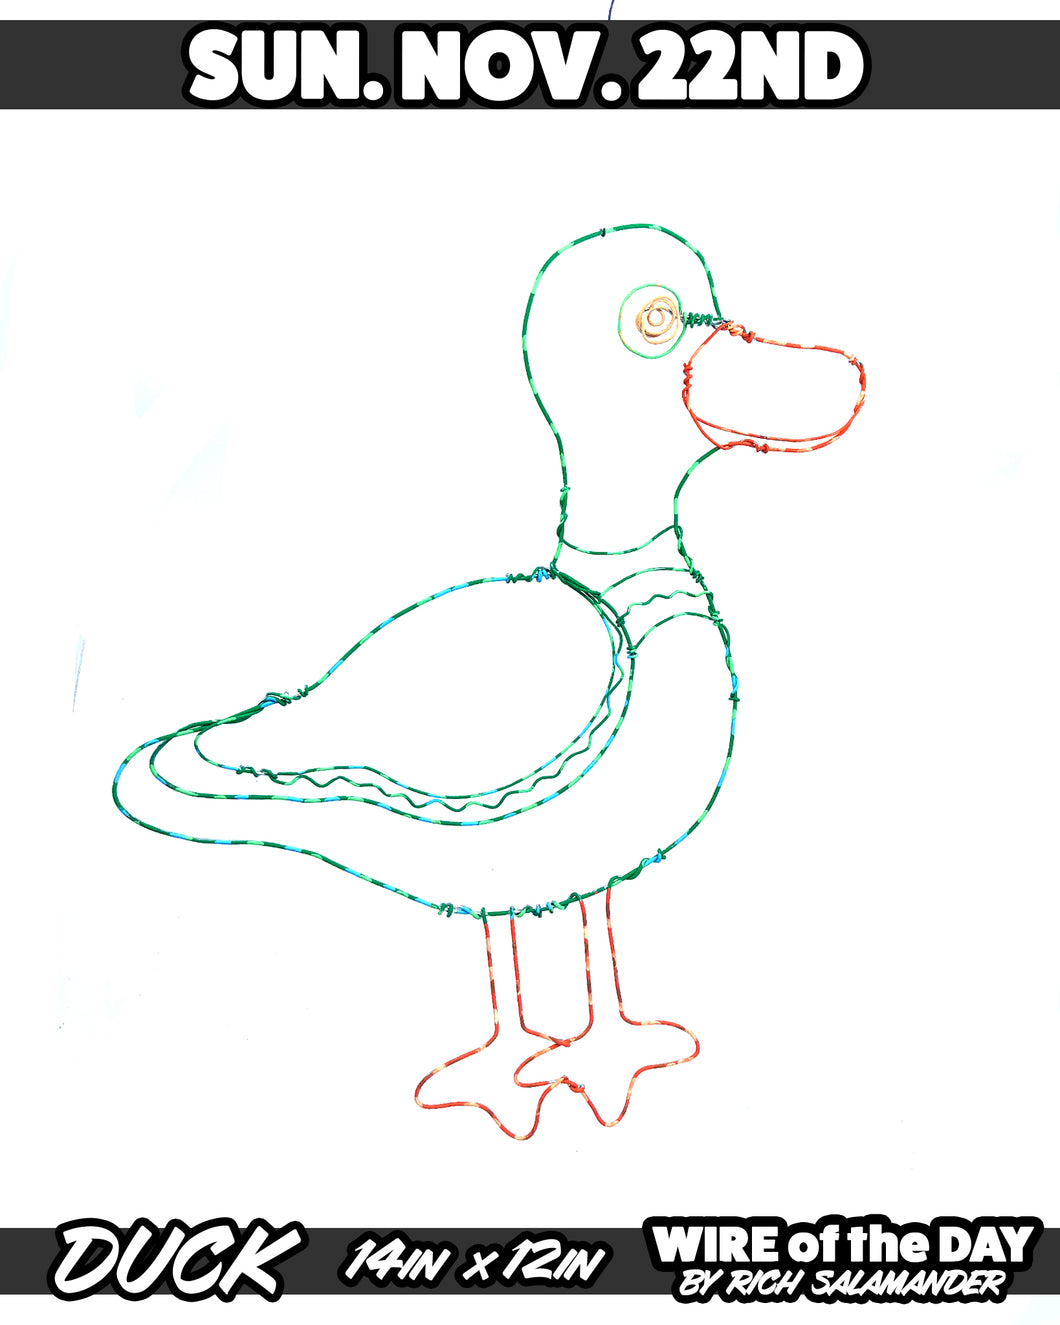 WIRE of the DAY DUCK*